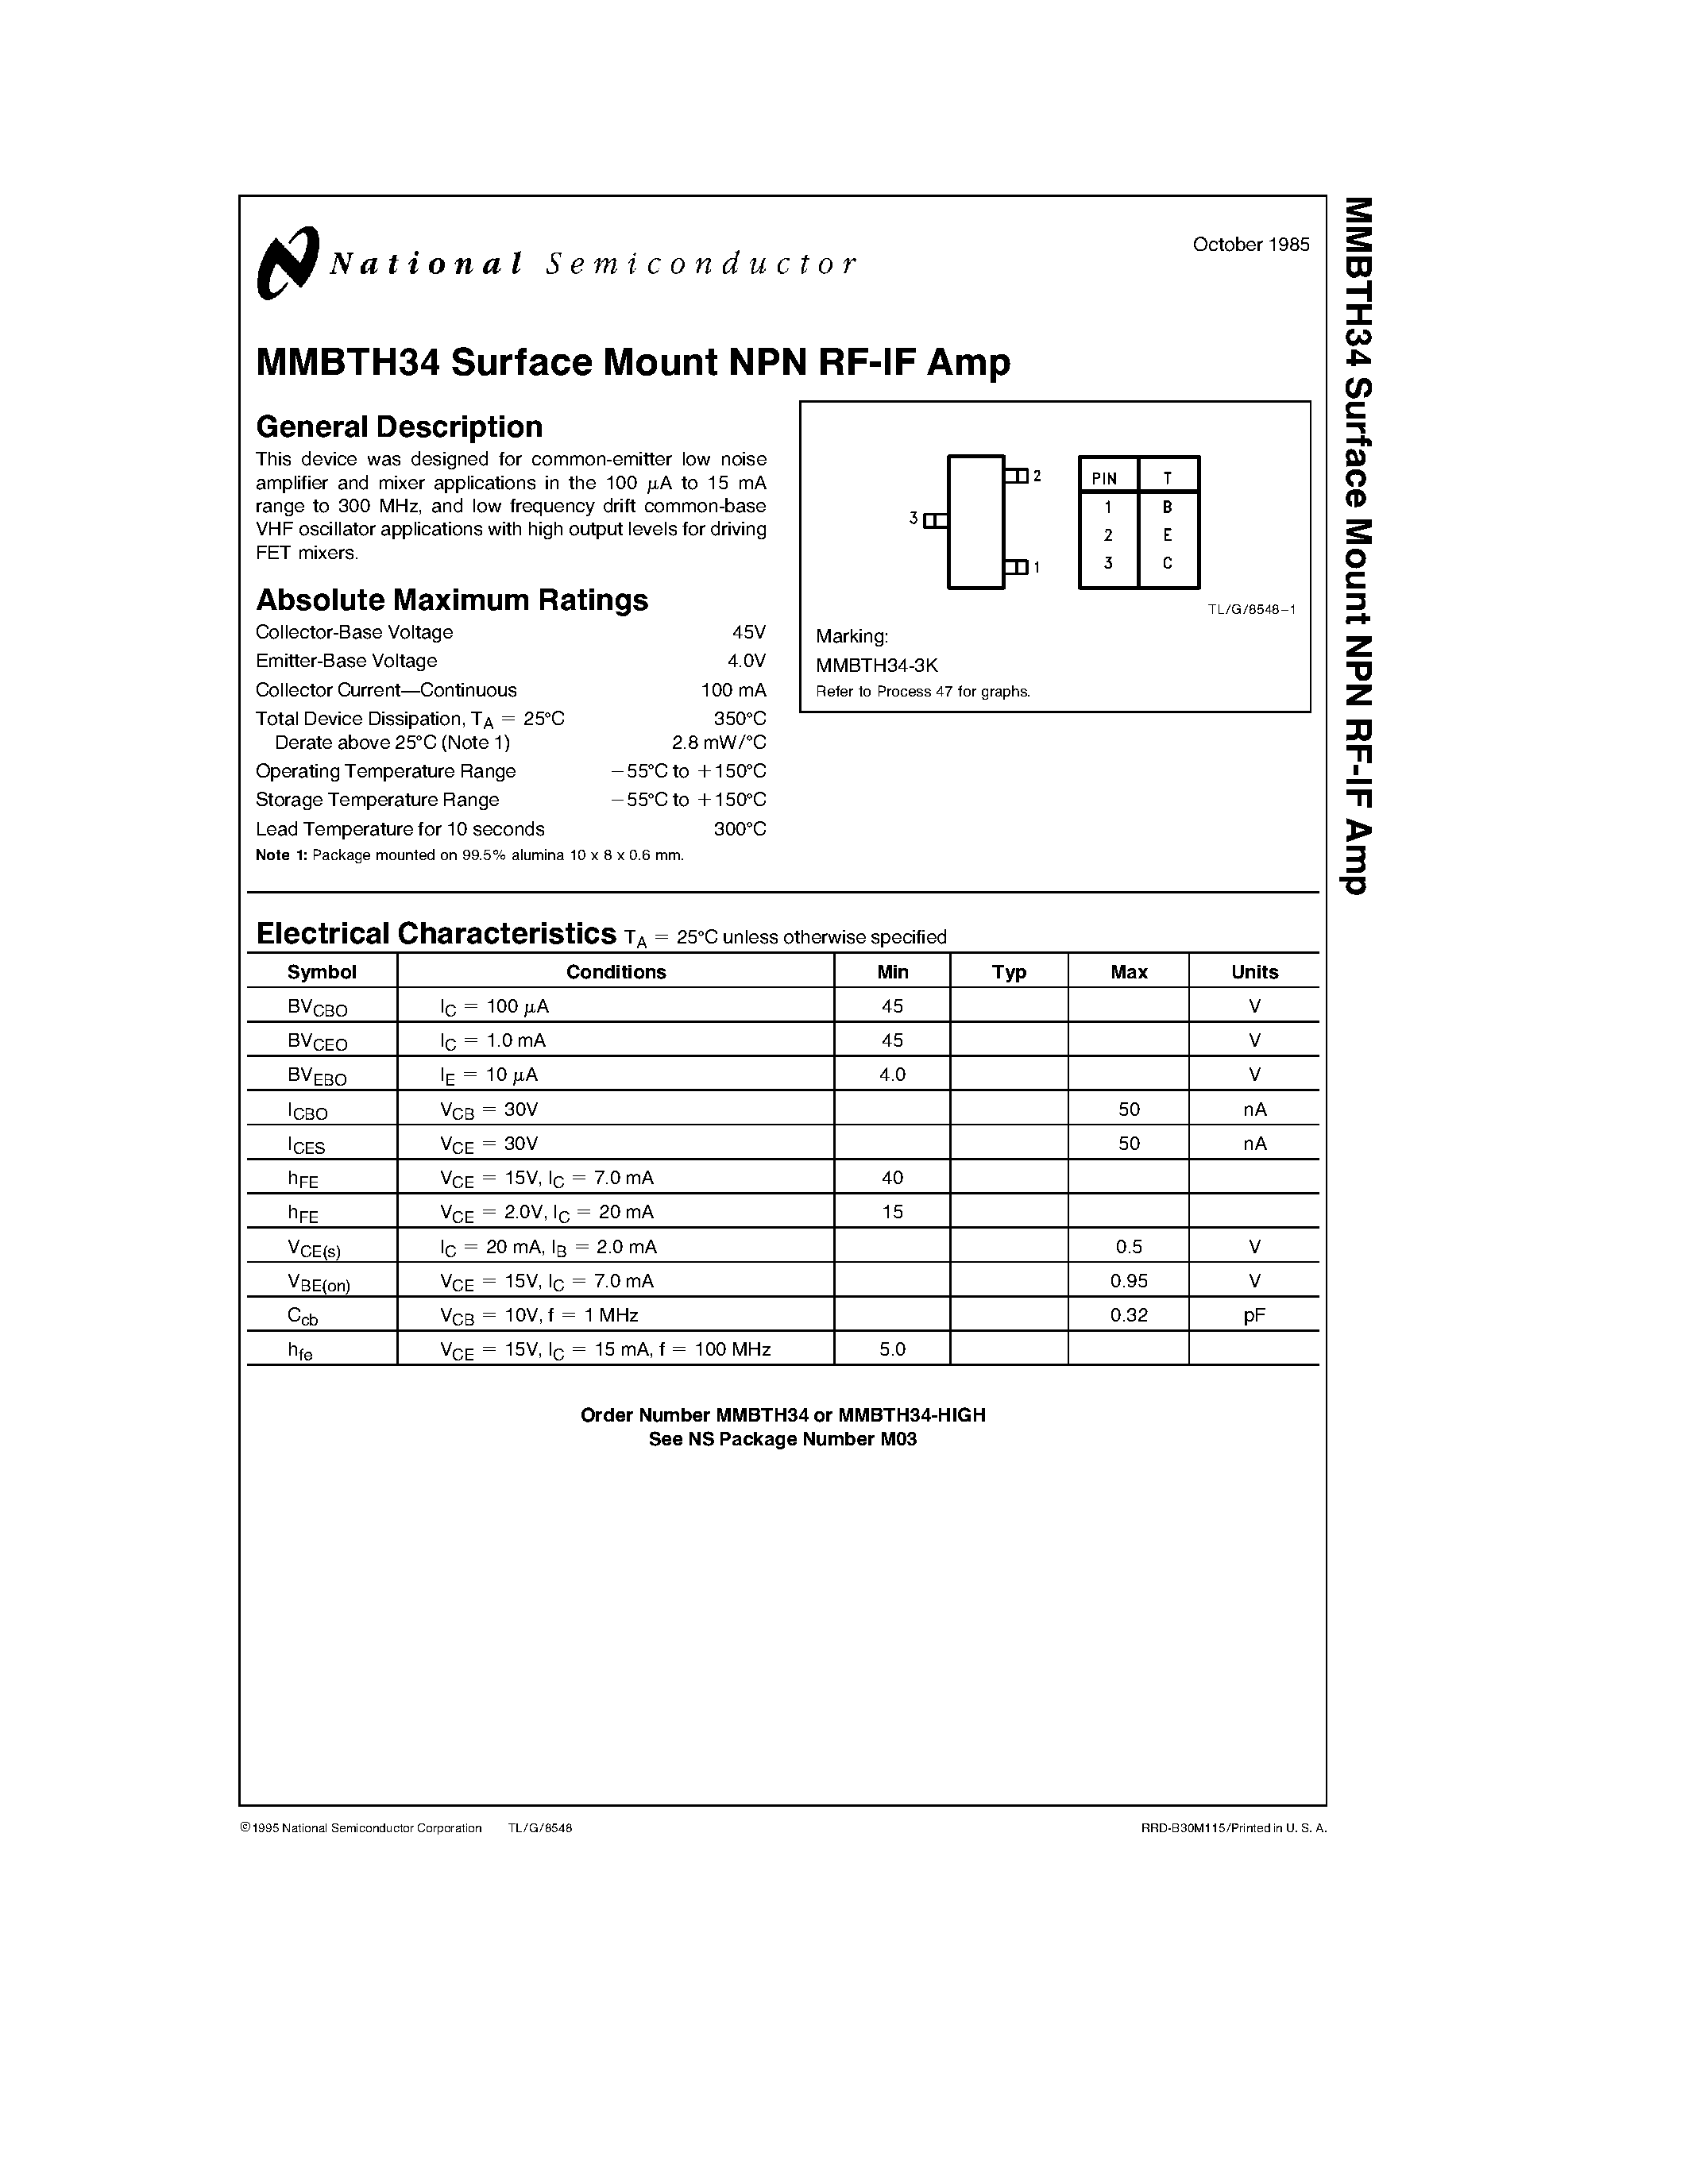 Datasheet MMBTH34 - MMBTH34 Surface Mount NPN RF-IF Amp page 1